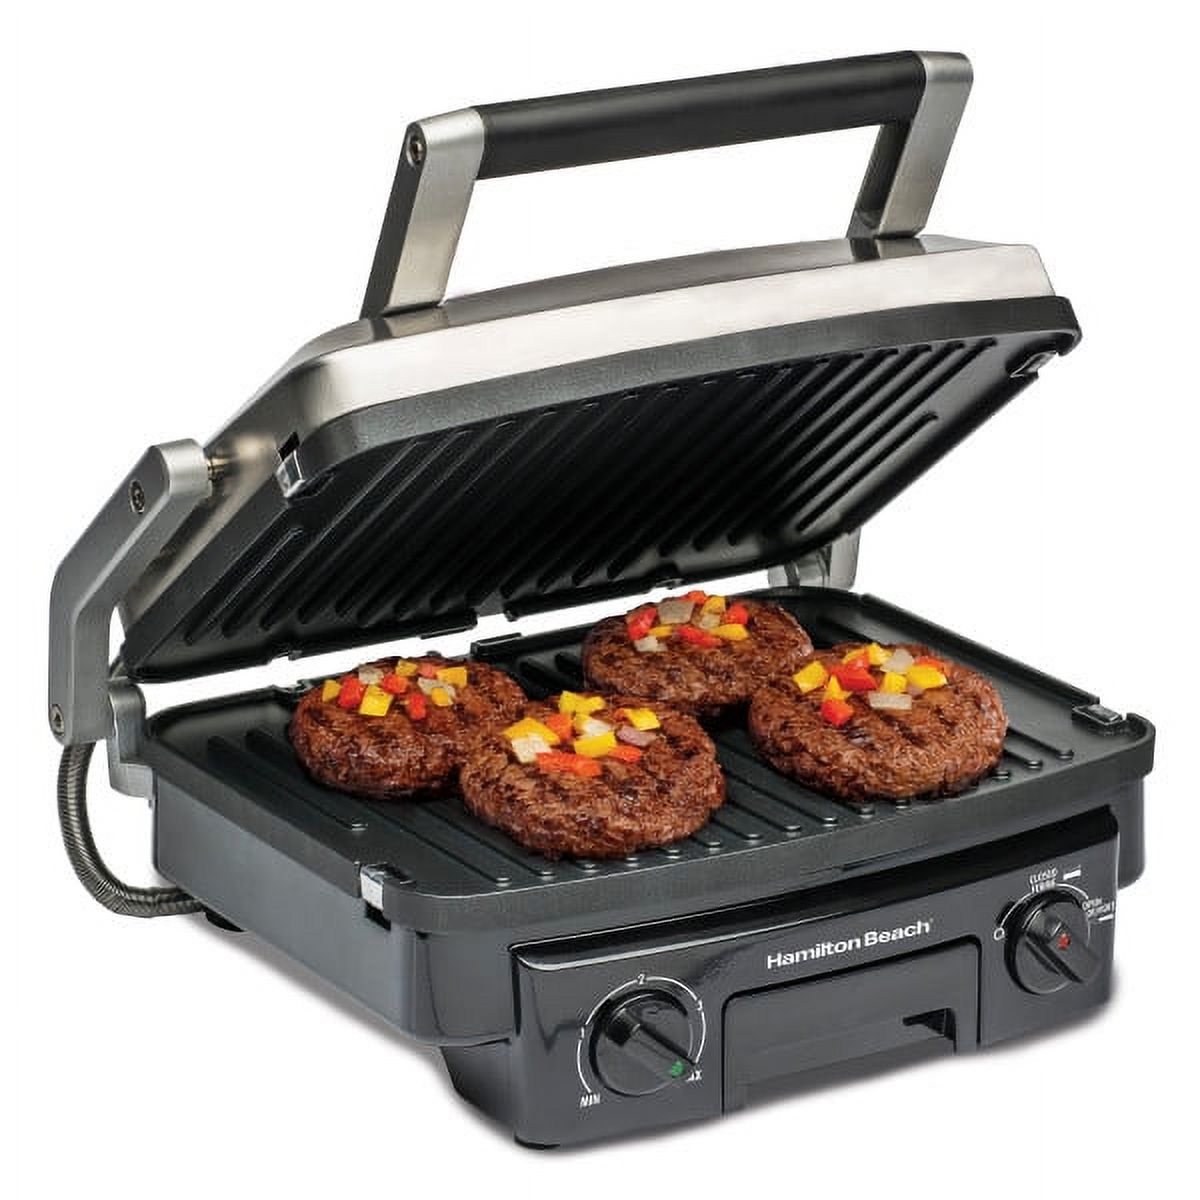 Proctor Silex Contact Grill with Reversible Grids - image 1 of 9